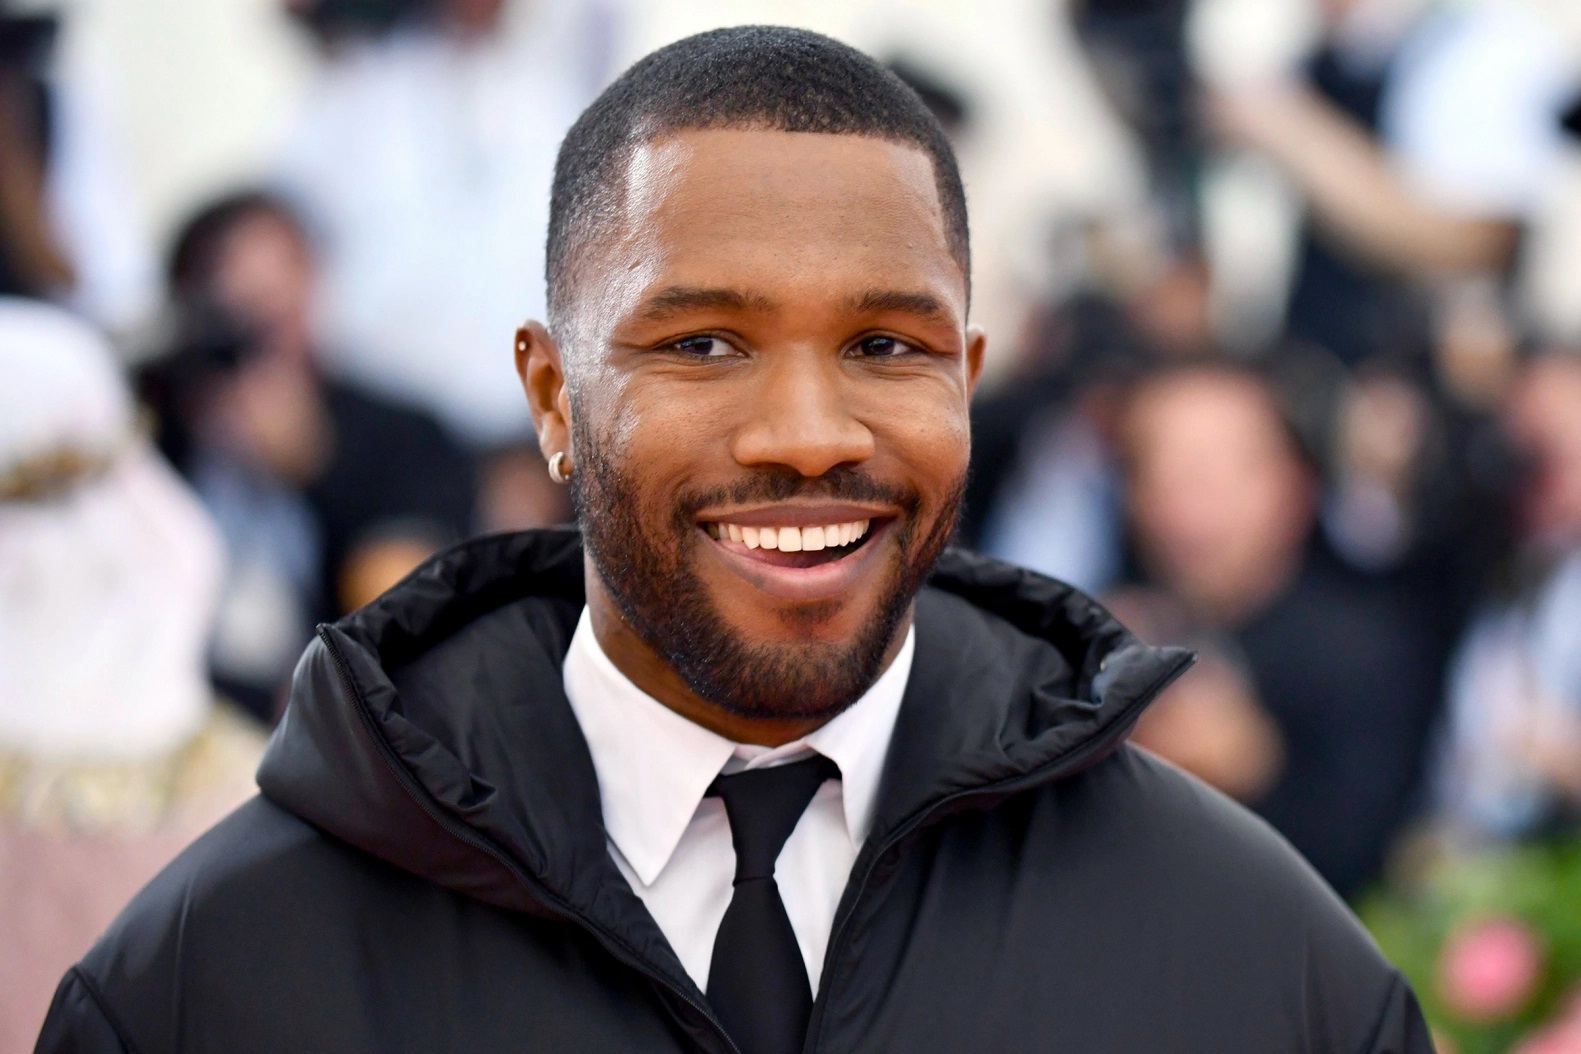 Frank Ocean is a well known musical artist who is an inspiration for many